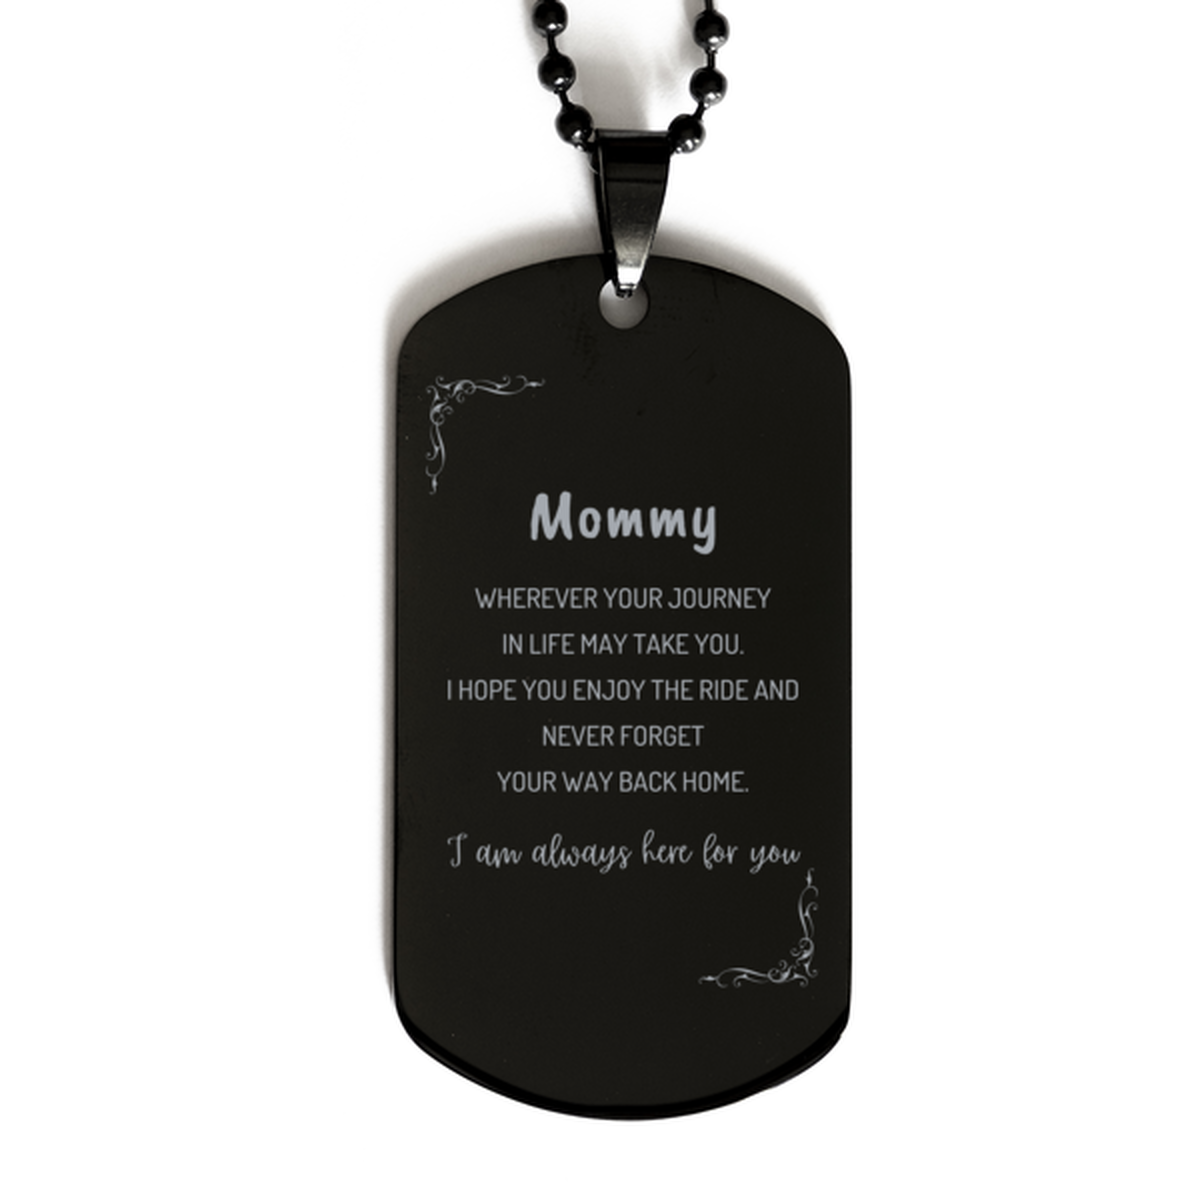 Mommy wherever your journey in life may take you, I am always here for you Mommy Black Dog Tag, Awesome Christmas Gifts For Mommy, Mommy Birthday Gifts for Men Women Family Loved One